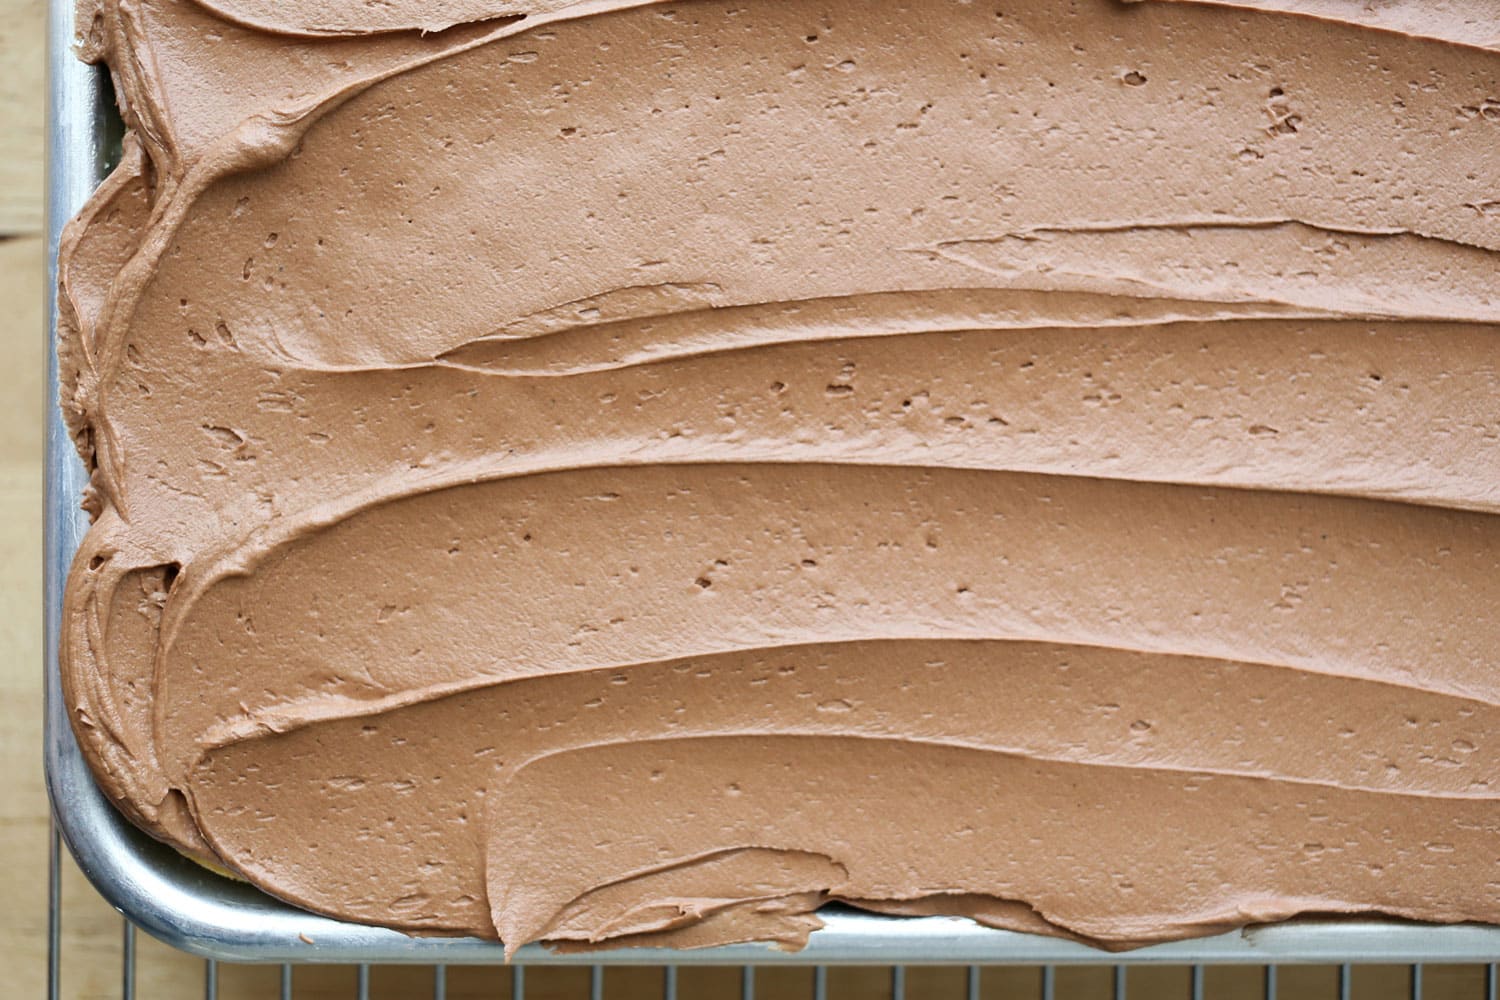 Fluffy, Creamy, Perfect Chocolate Buttercream Frosting